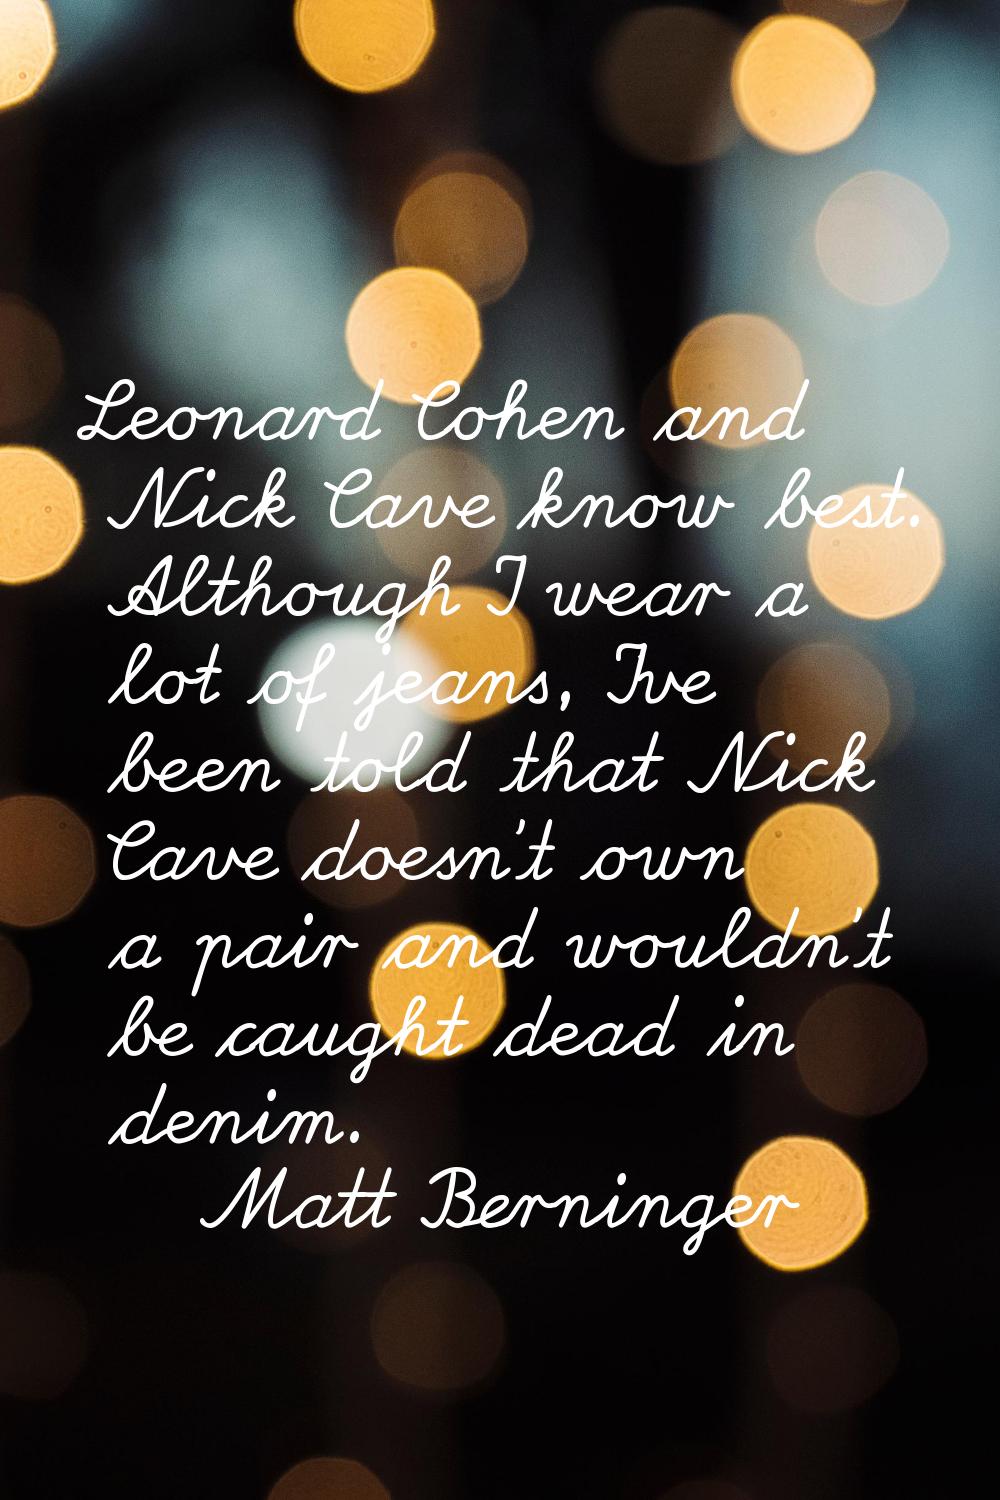 Leonard Cohen and Nick Cave know best. Although I wear a lot of jeans, I've been told that Nick Cav